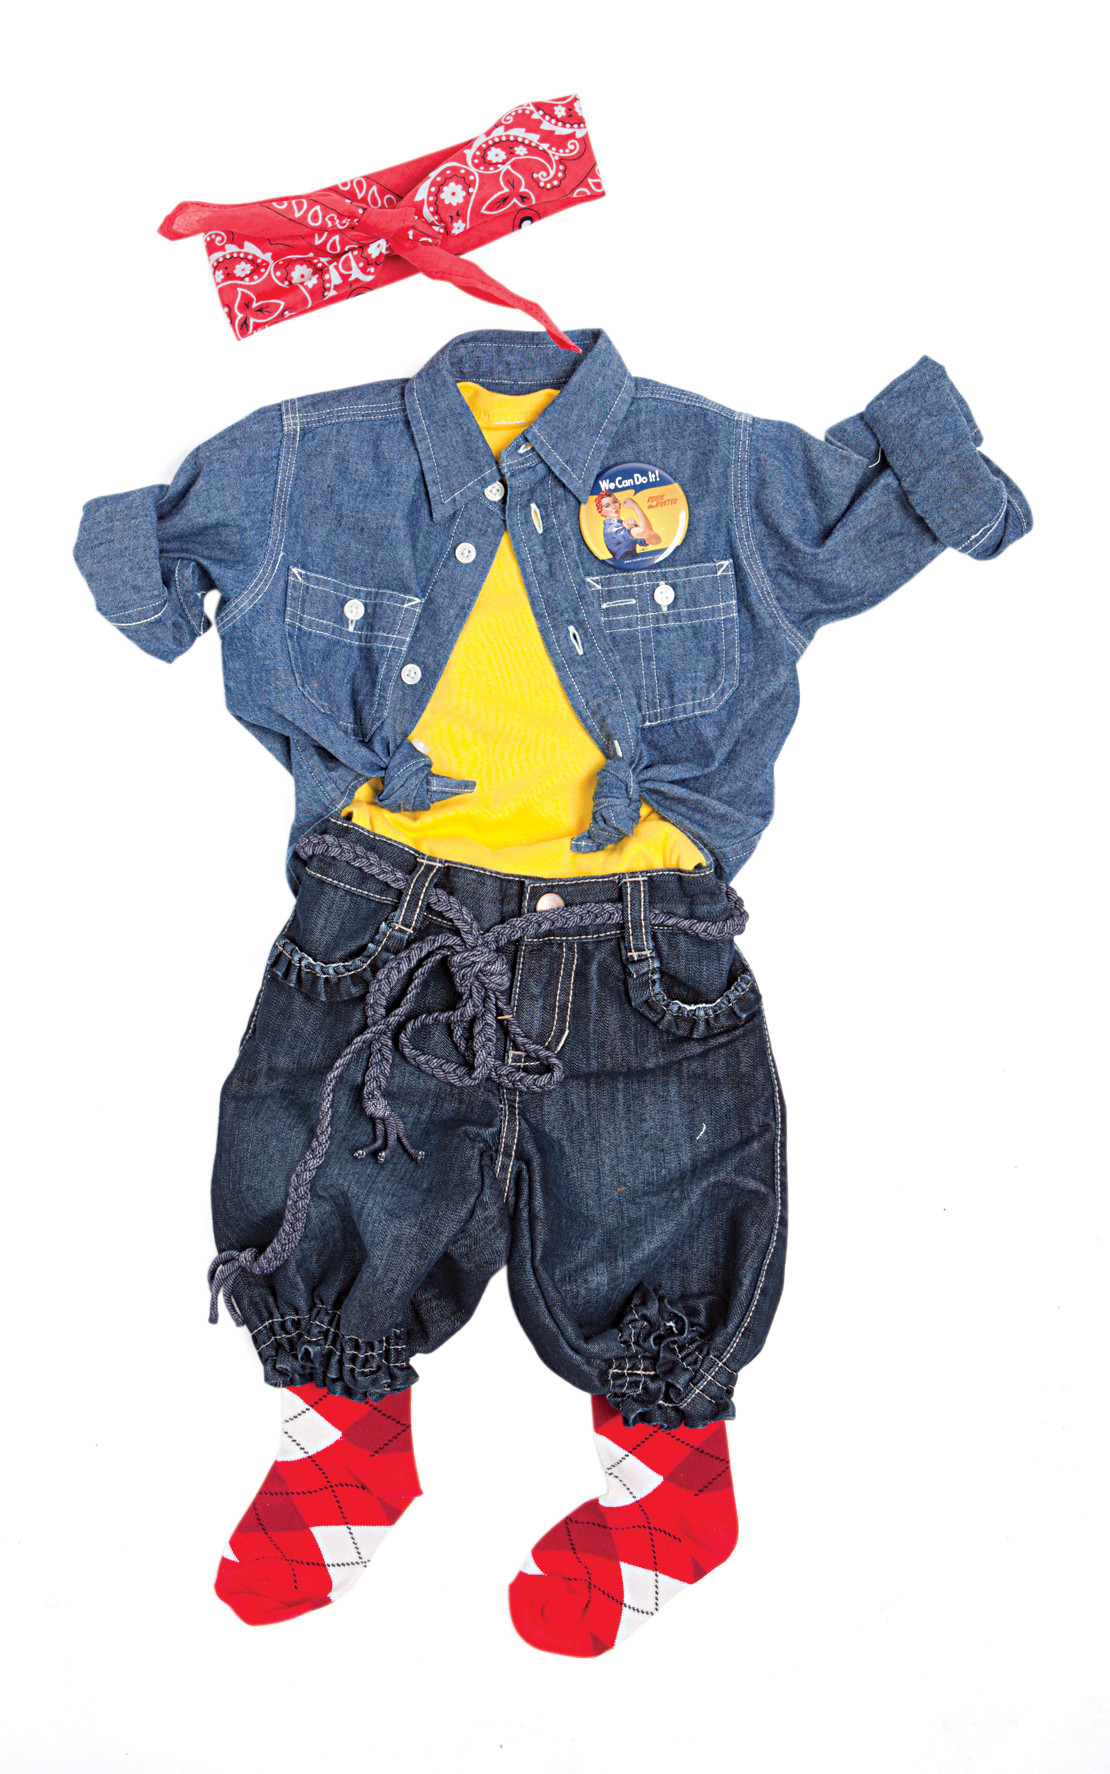 Rosie The Riveter Costume DIY
 9 Fun Infant and Baby DIY Halloween Costume Ideas Parenting